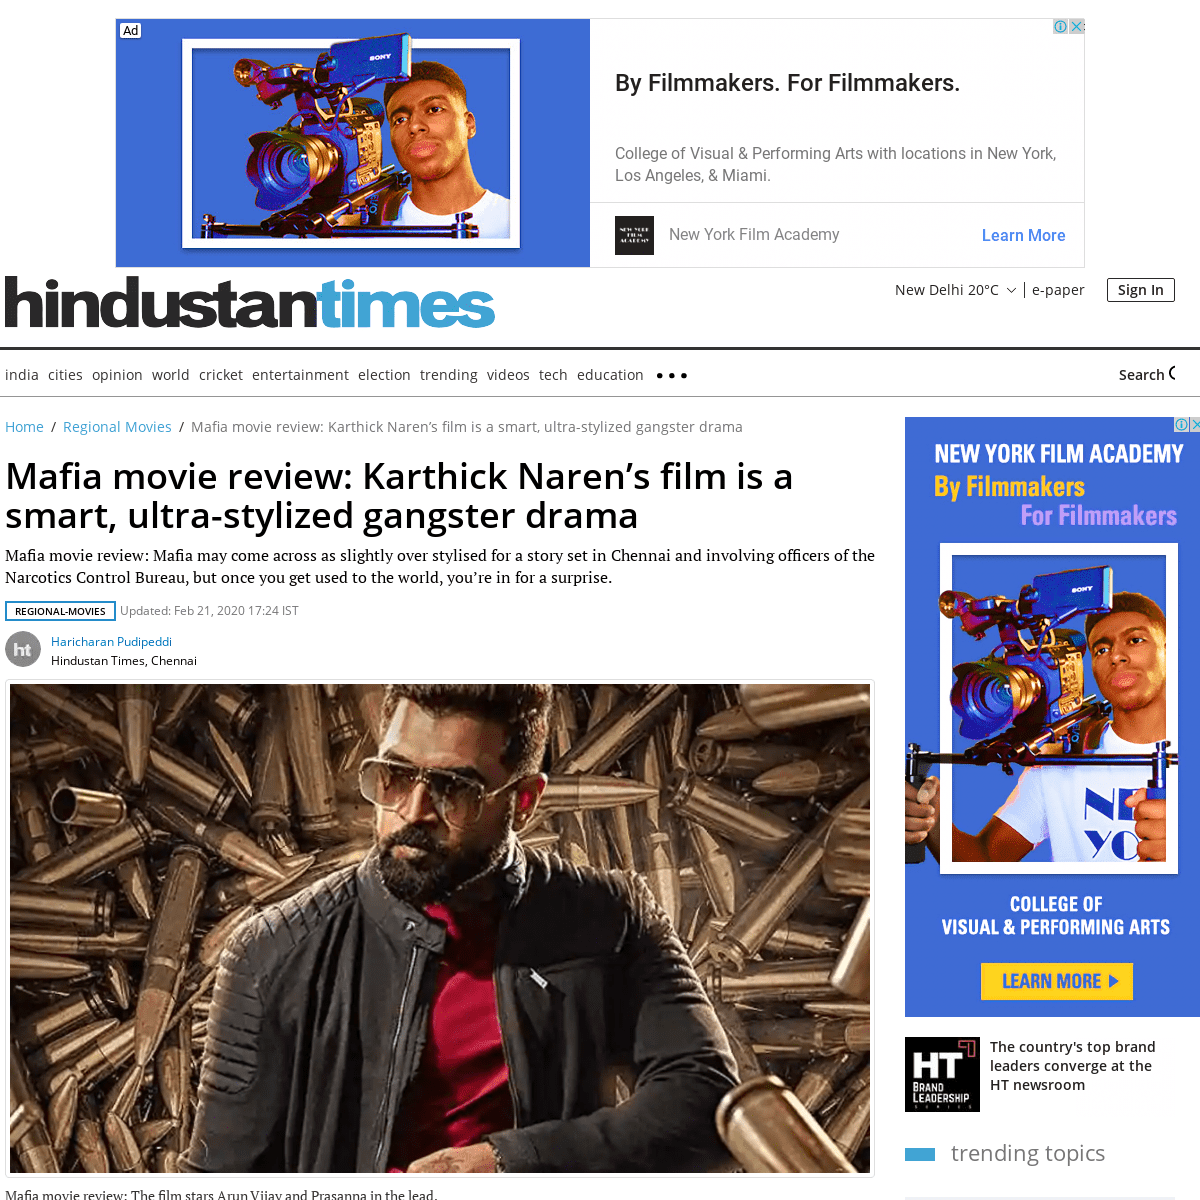 A complete backup of www.hindustantimes.com/regional-movies/mafia-movie-review-karthick-naren-s-film-is-a-smart-ultra-stylized-g